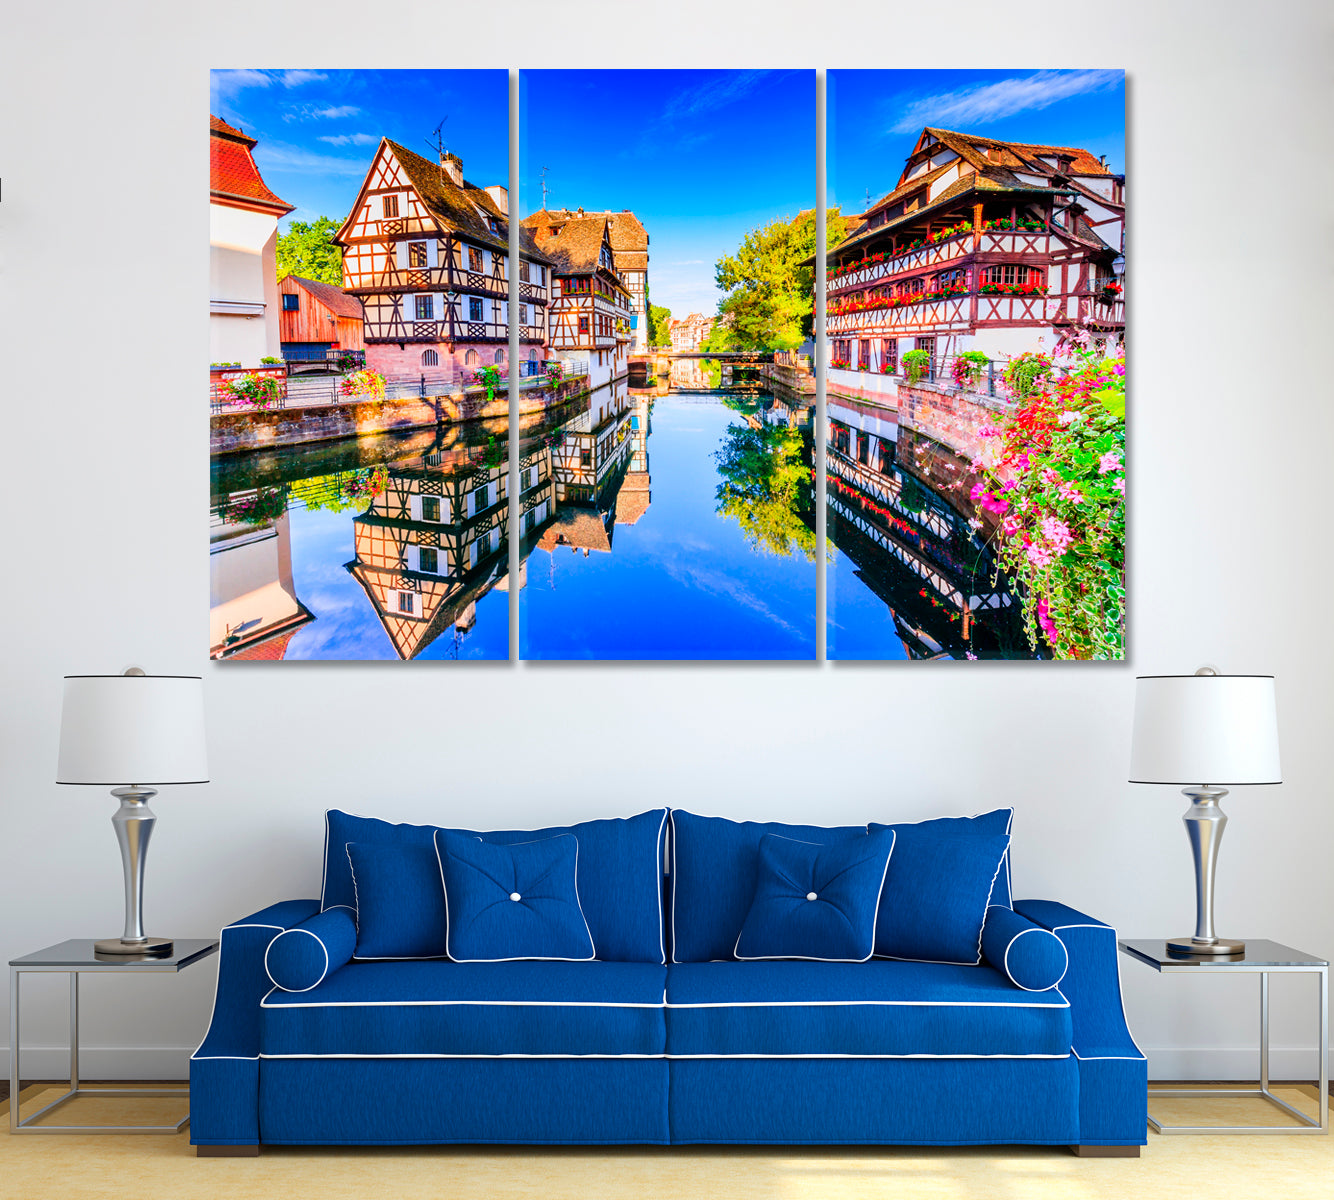 Petite France Strasbourg Canvas Print ArtLexy 3 Panels 36"x24" inches 